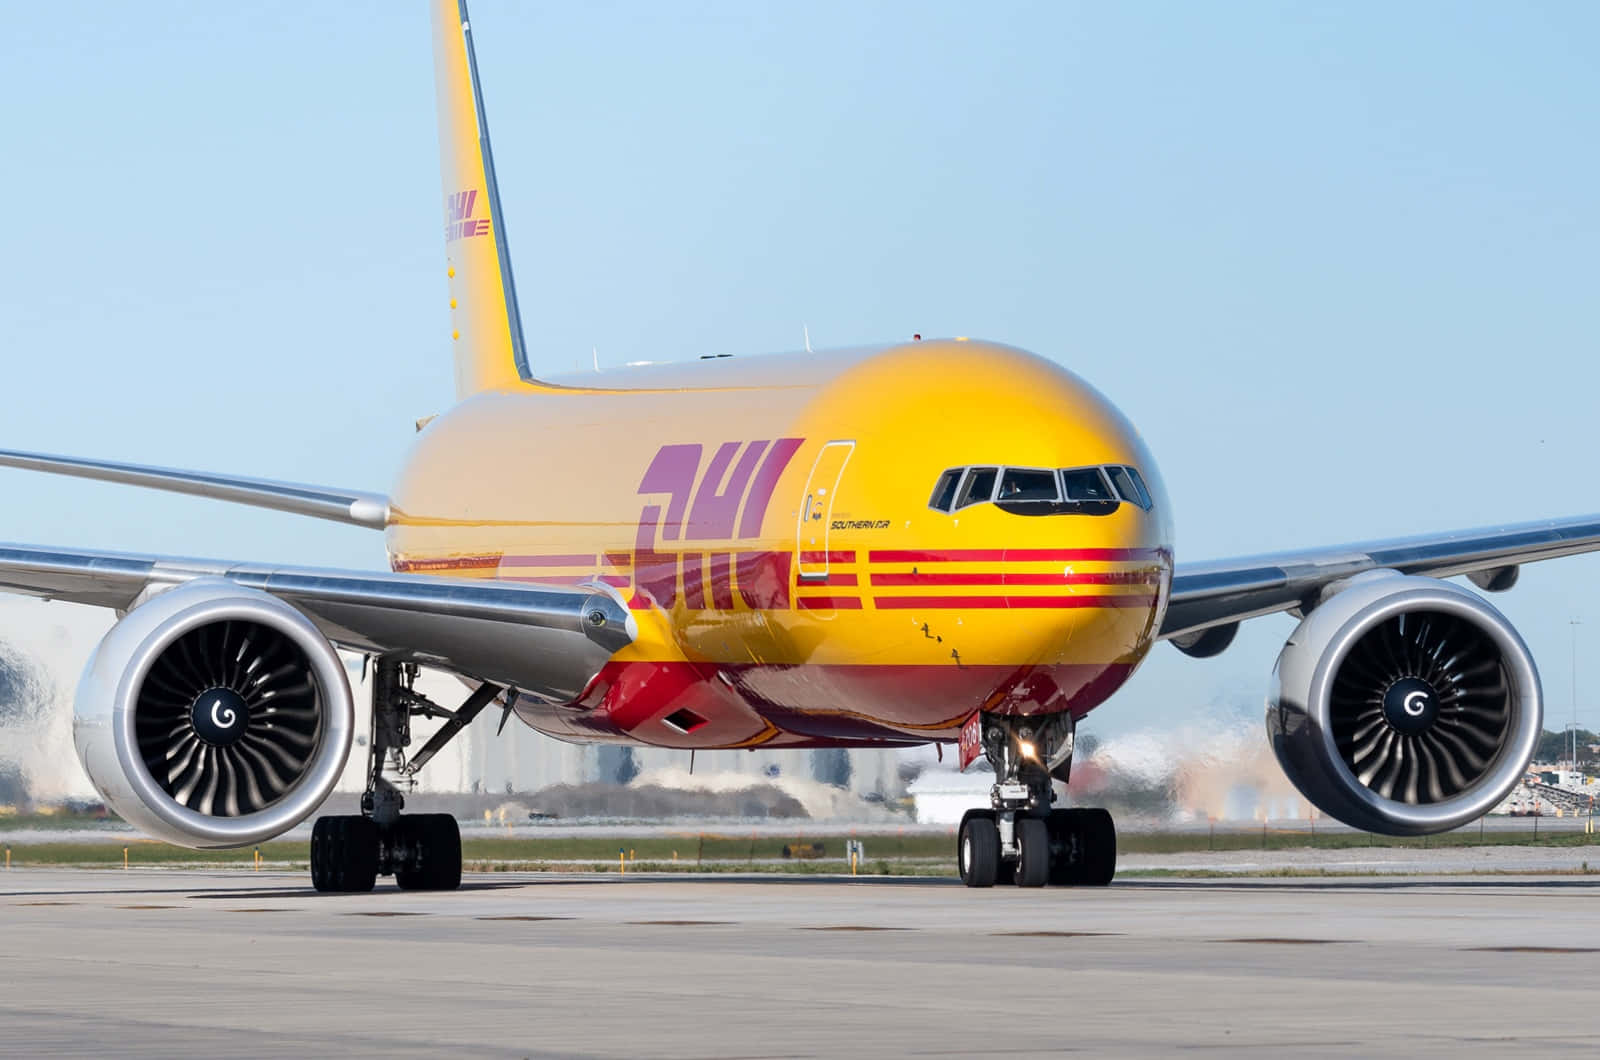 Stay on top of your shipment with DHL Express.